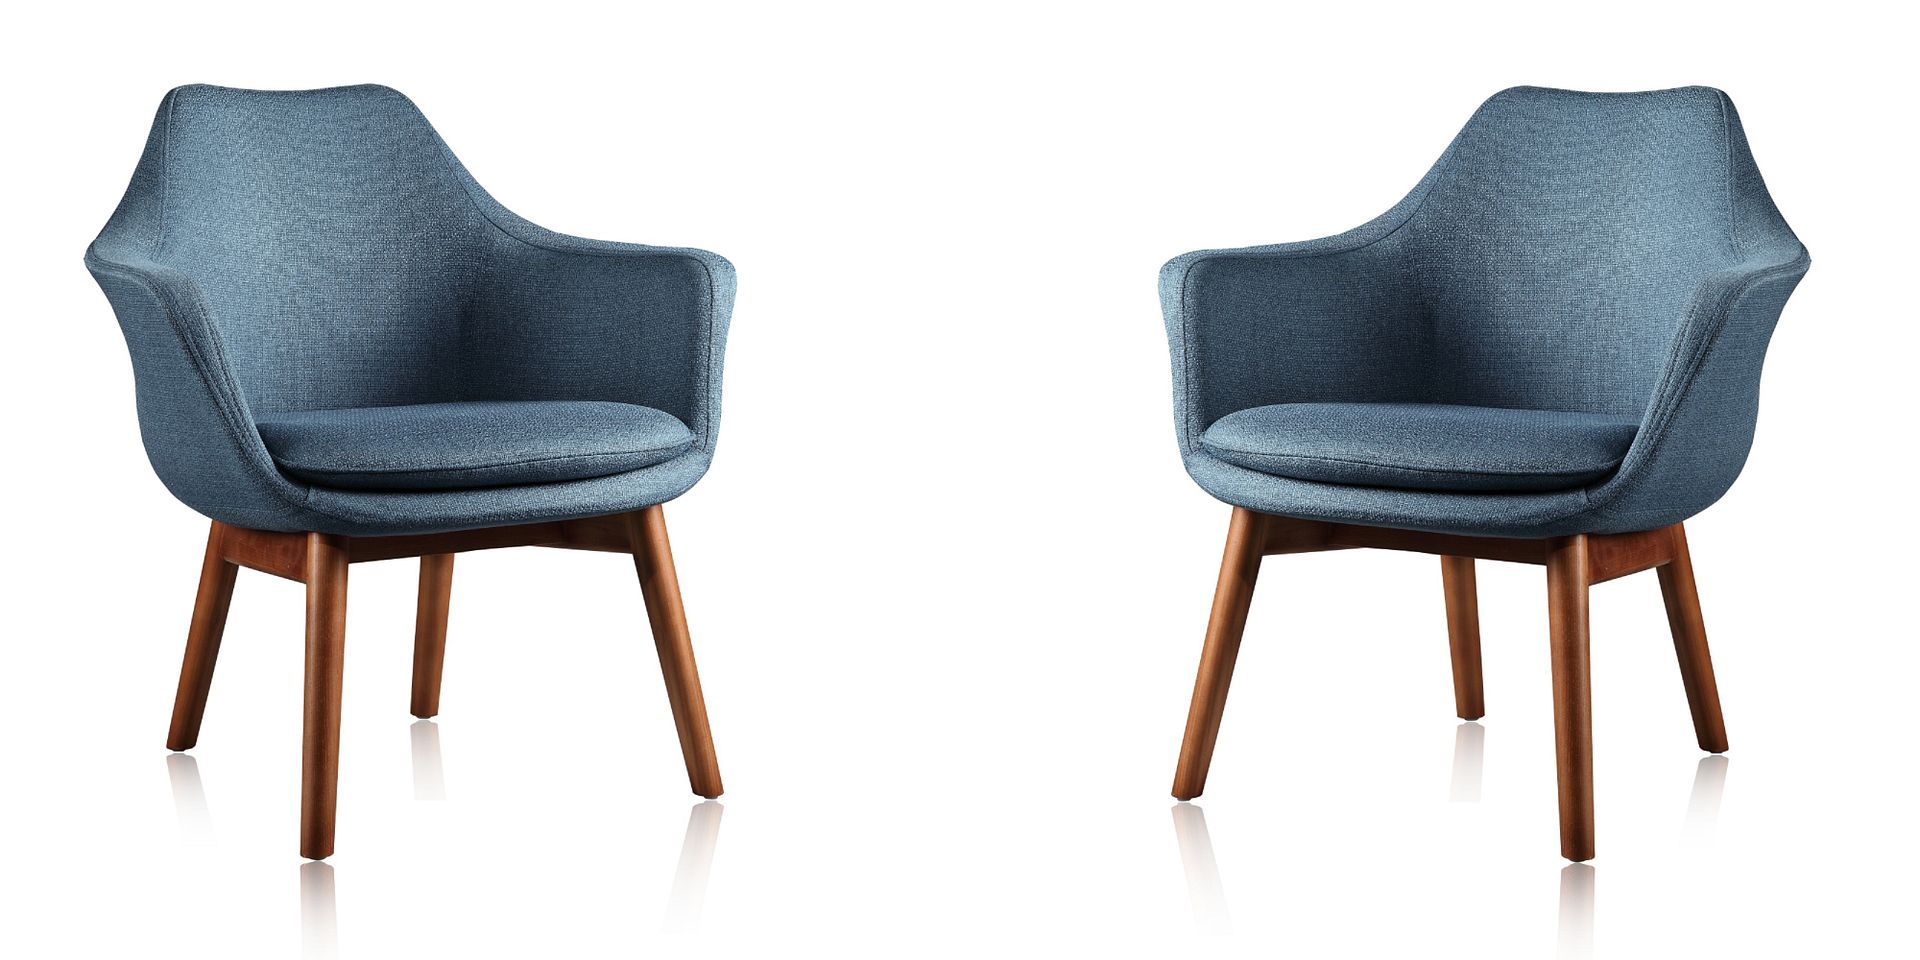 Cronkite Accent Chair - Set of 2